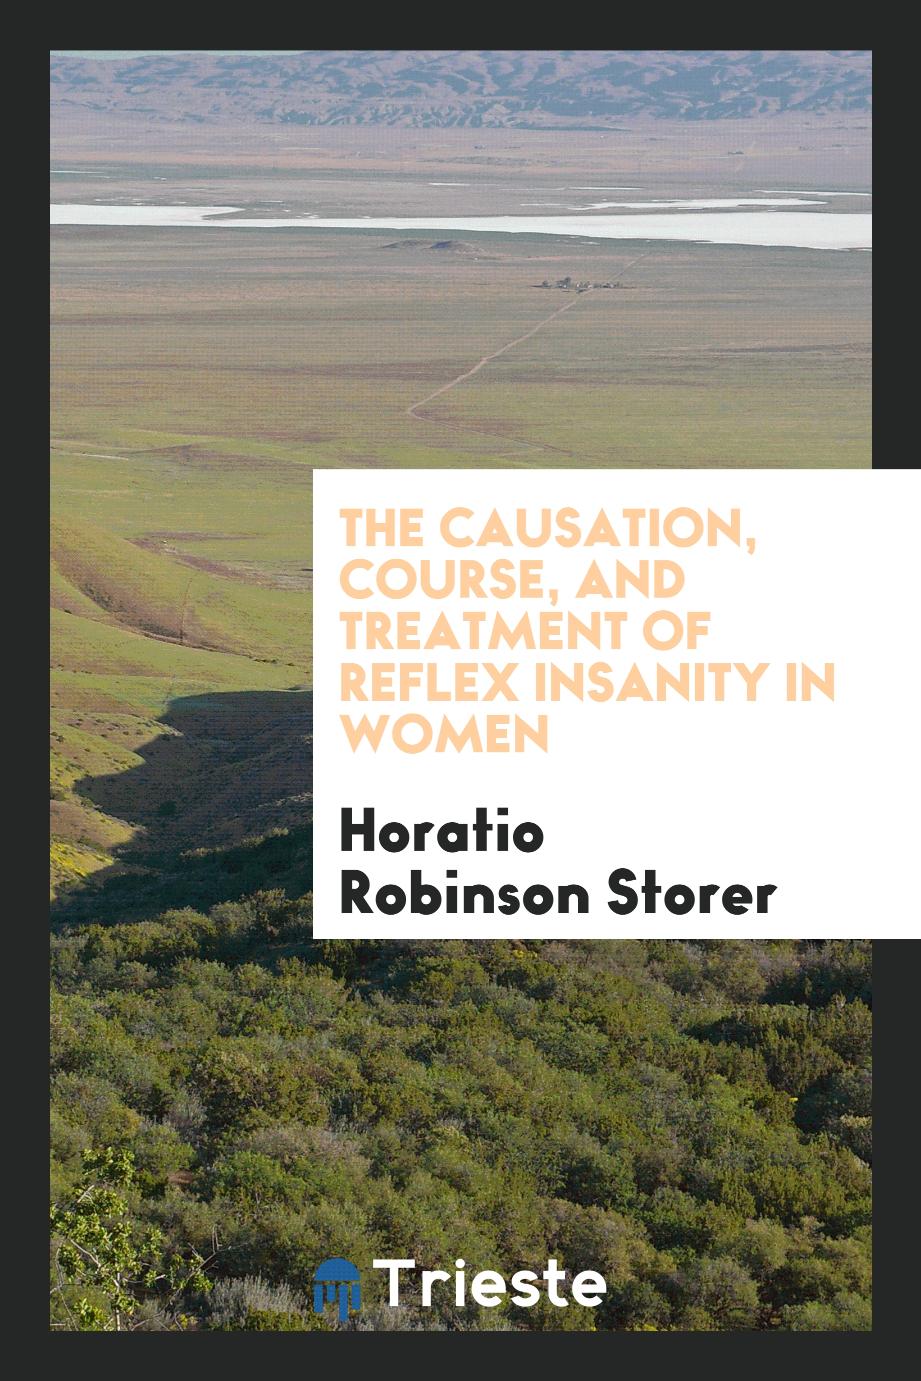 The causation, course, and treatment of reflex insanity in women